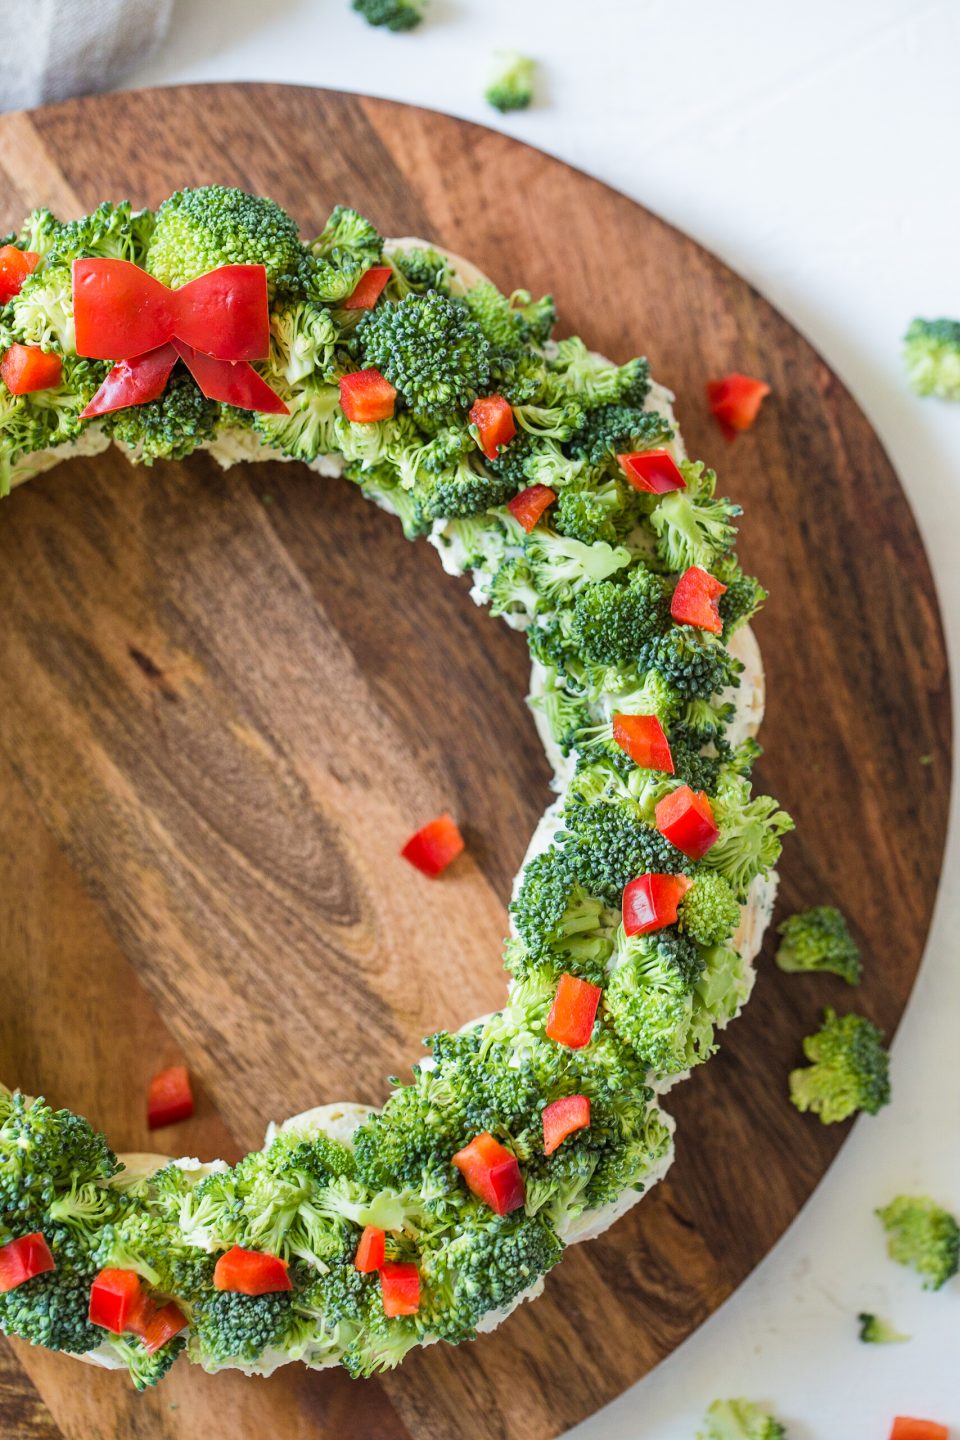 Dough balls that are cooked in the shape of a wreath. Then topped with a cream cheese and ranch mixture and sprinkled with chopped broccoli and red pepper.